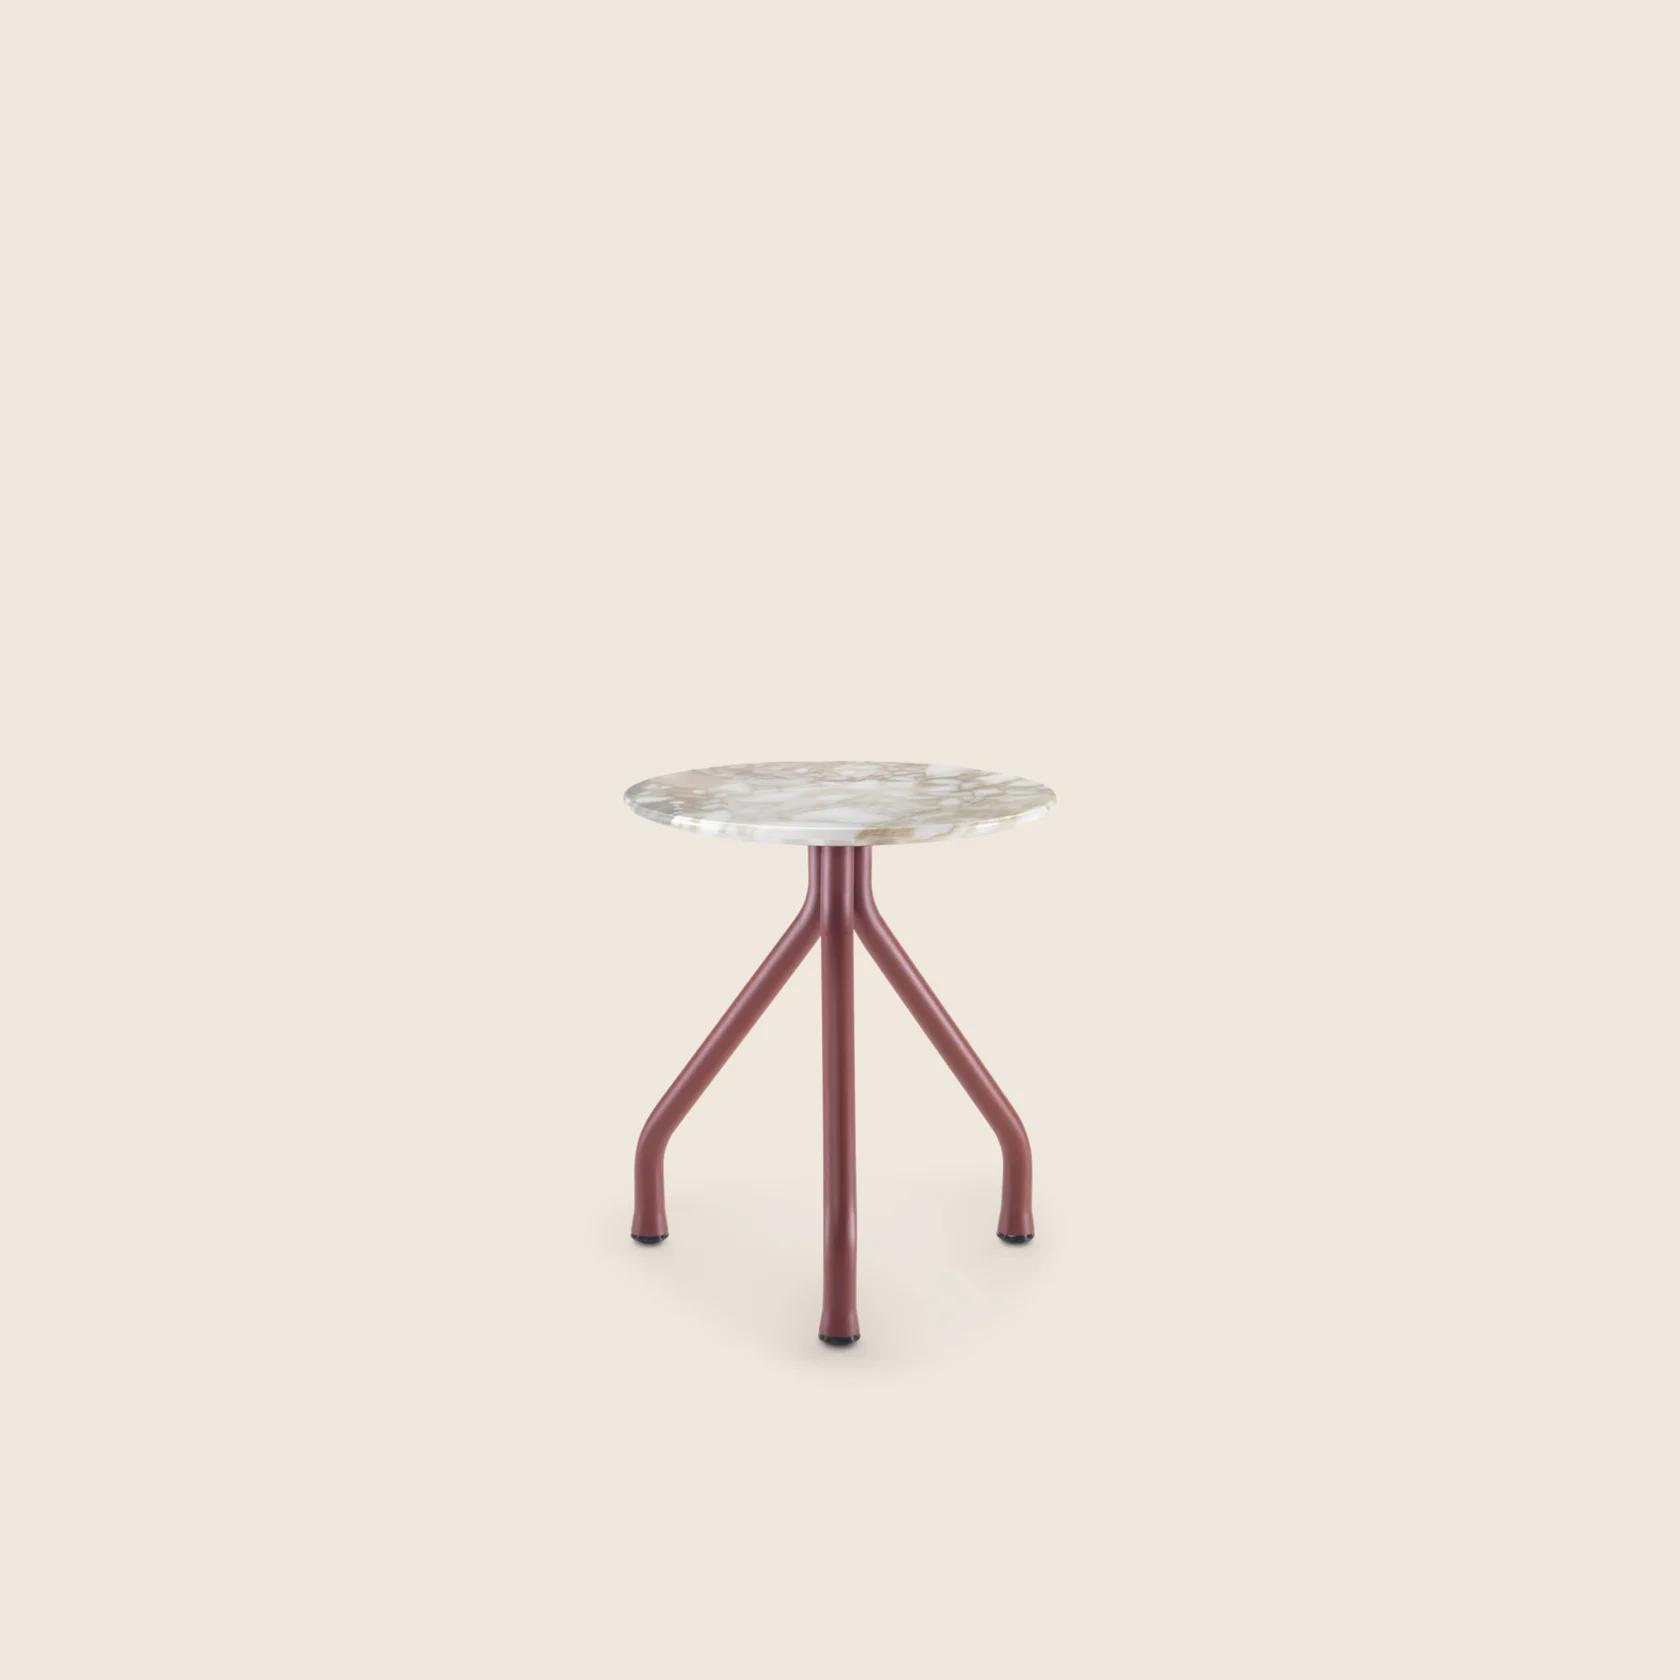 02A160_ACADEMY_COFFEETABLE_01.png